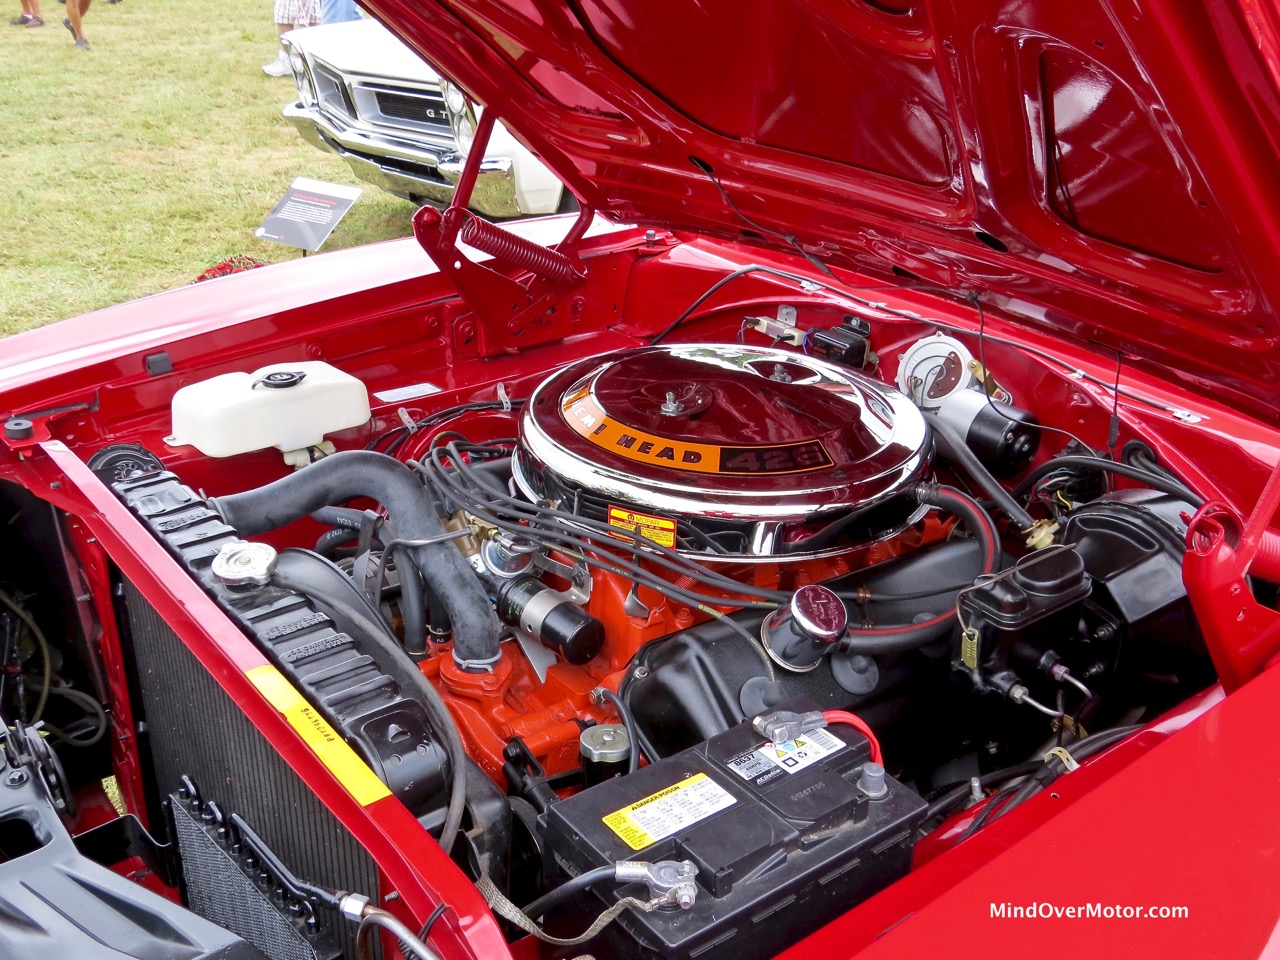 1968 Dodge Charger R:T Engine